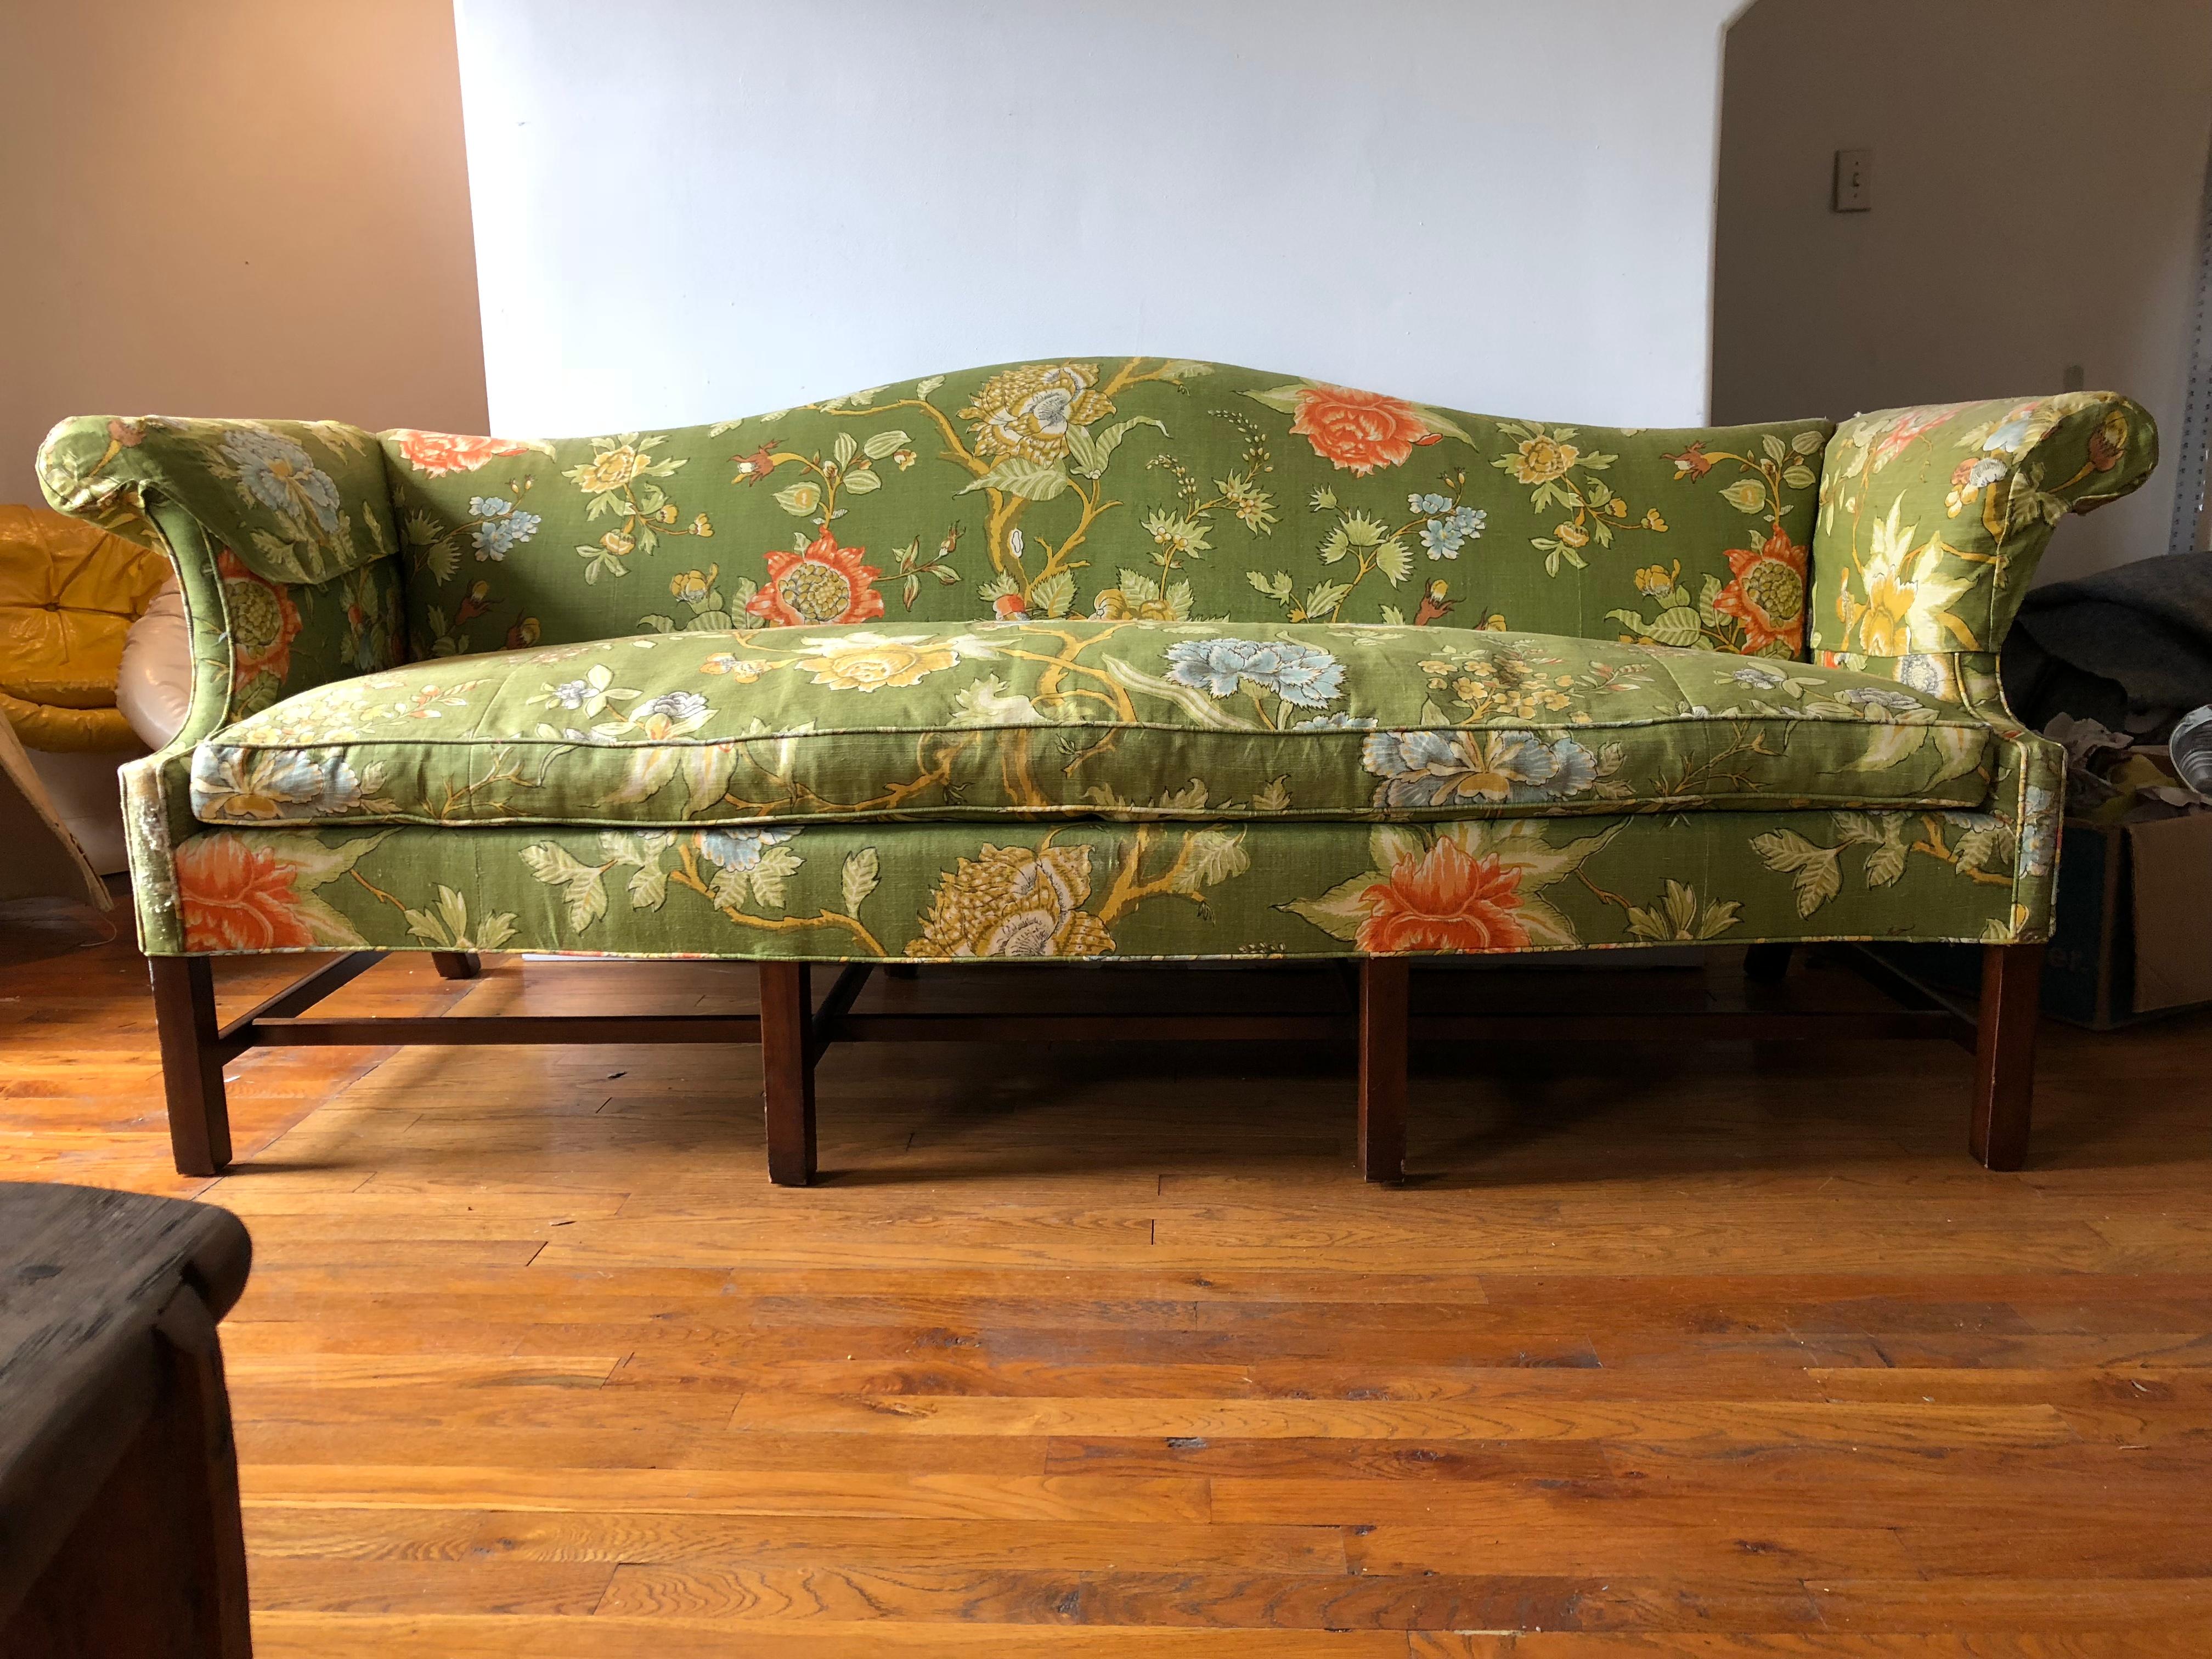 Vintage Baker Furniture Co. Modern green linen floral camelback sofa, mahogany base. Gorgeous blush pink peony Jacobean floral pattern with blue buds on fresh Kelly green background. Stunning lines and elegant proportions. 3-seat. With tags/ labels.